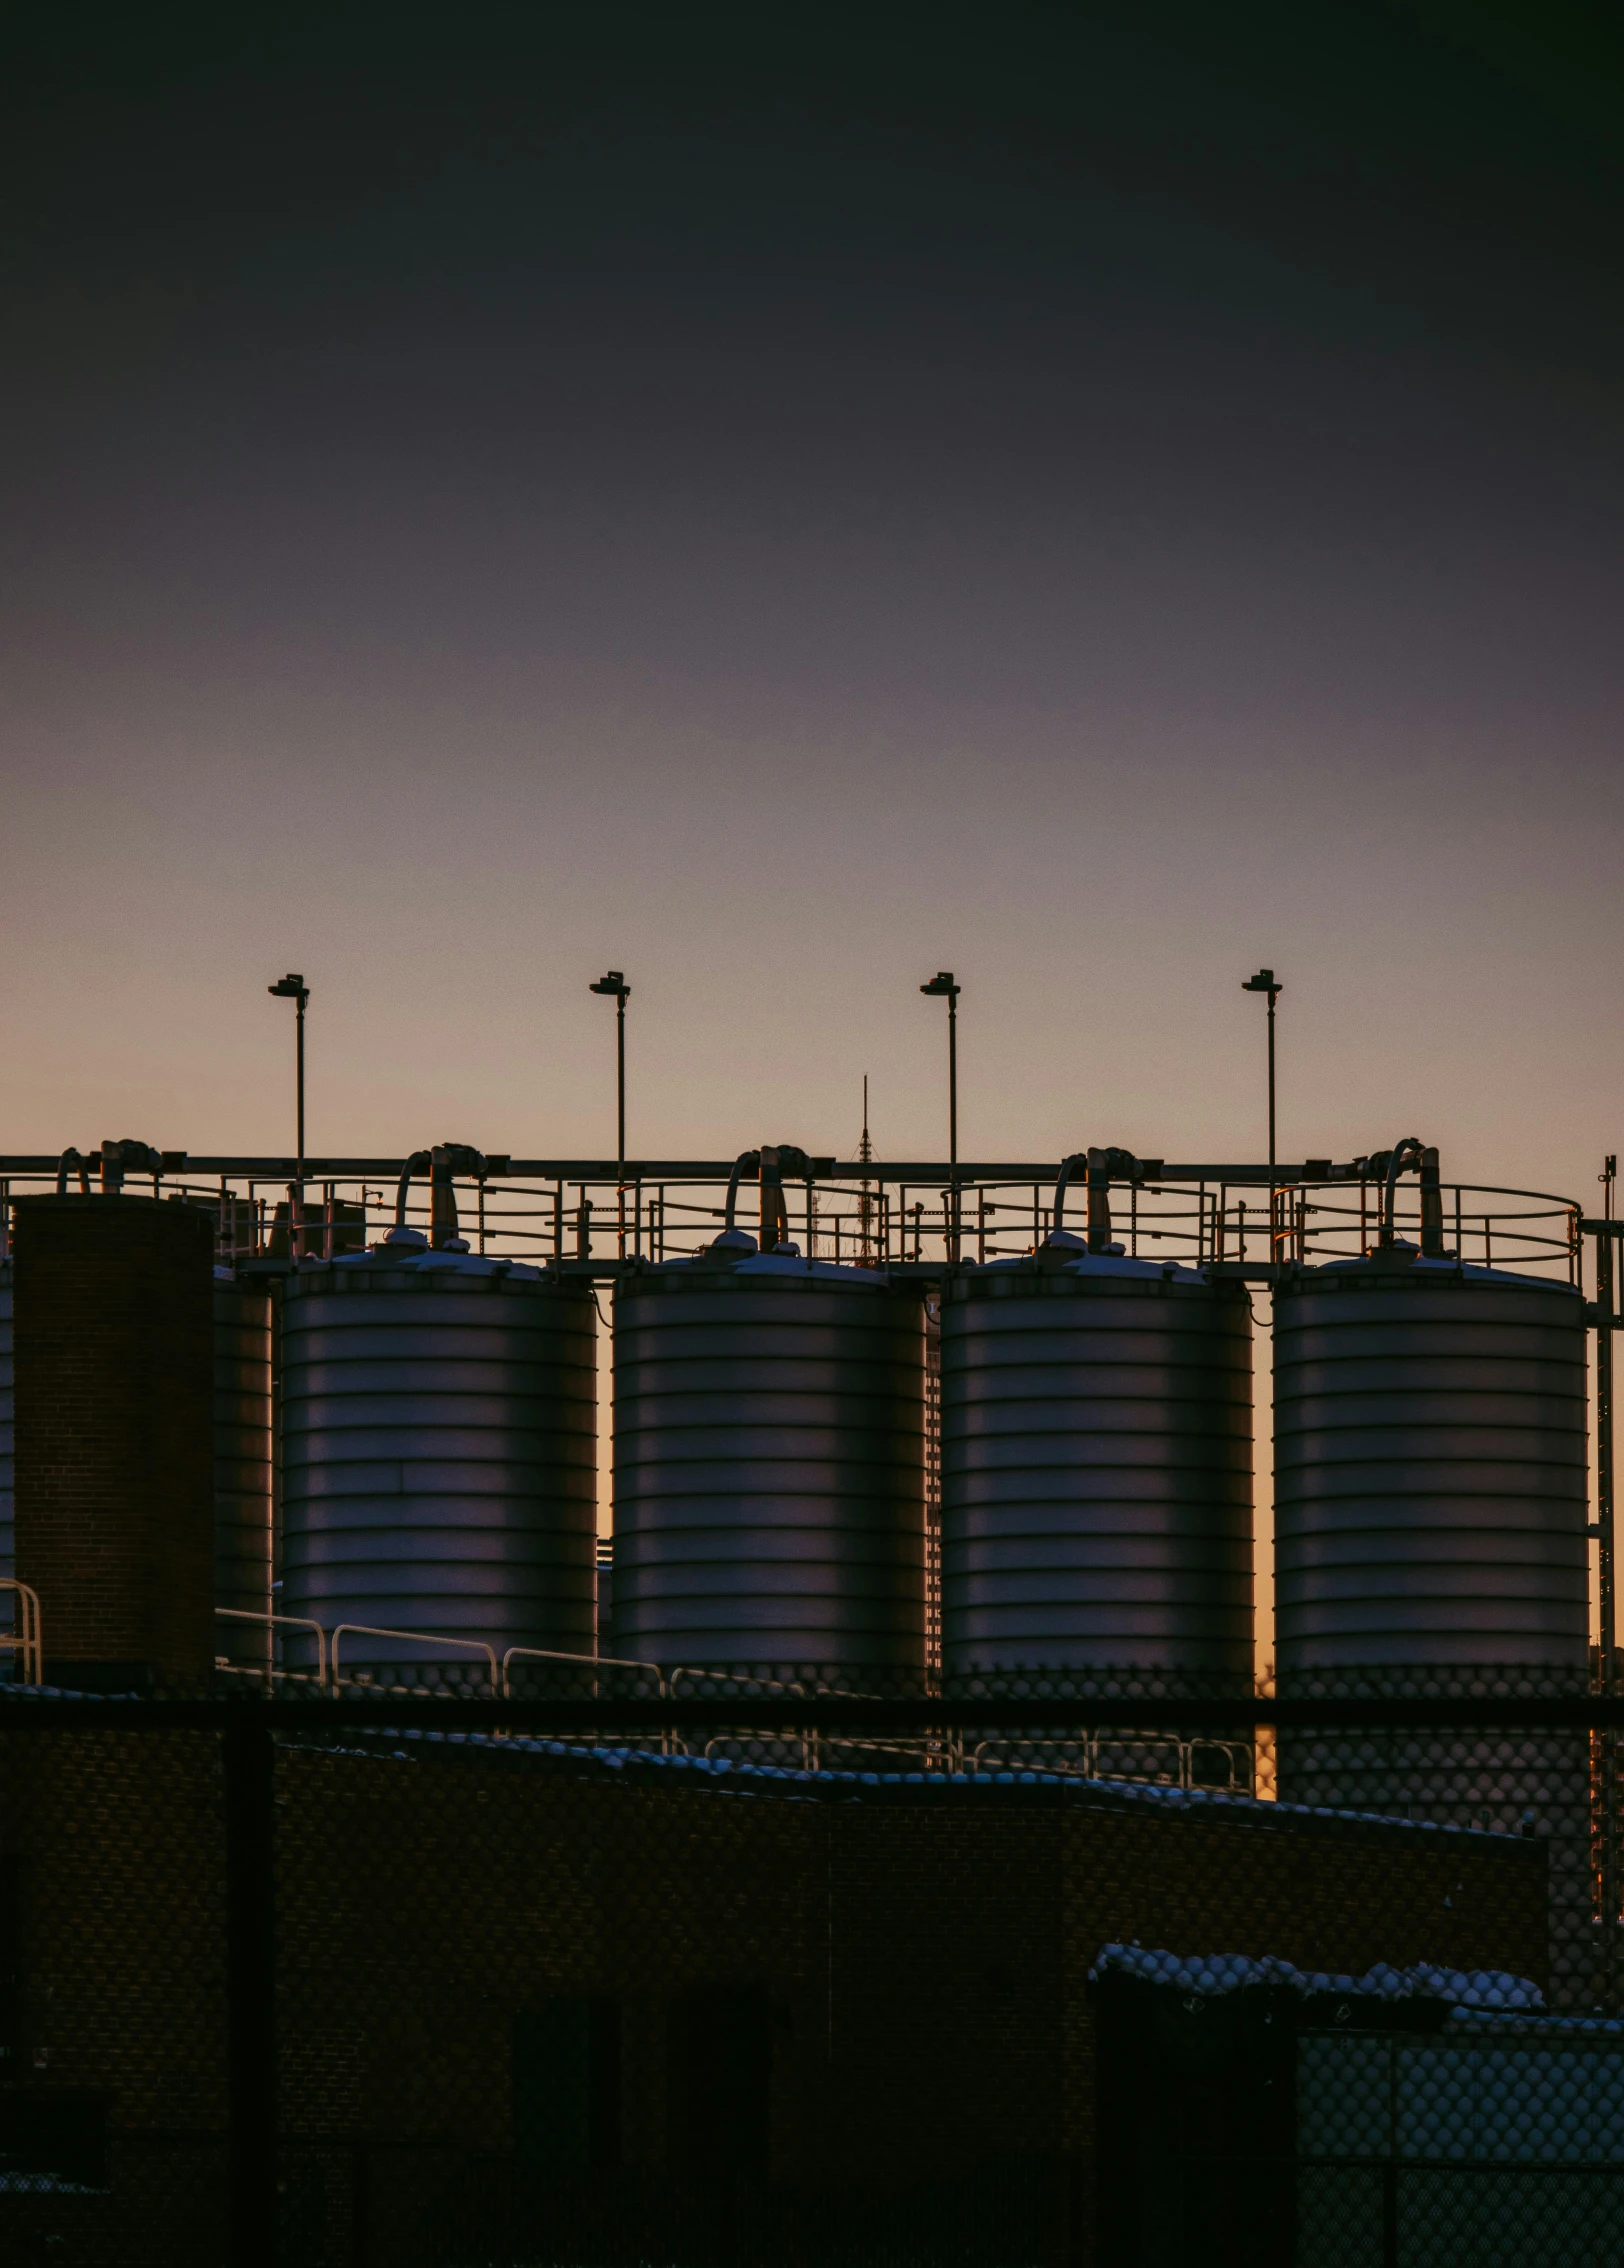 silhouette of grain silos in background with dusk sky